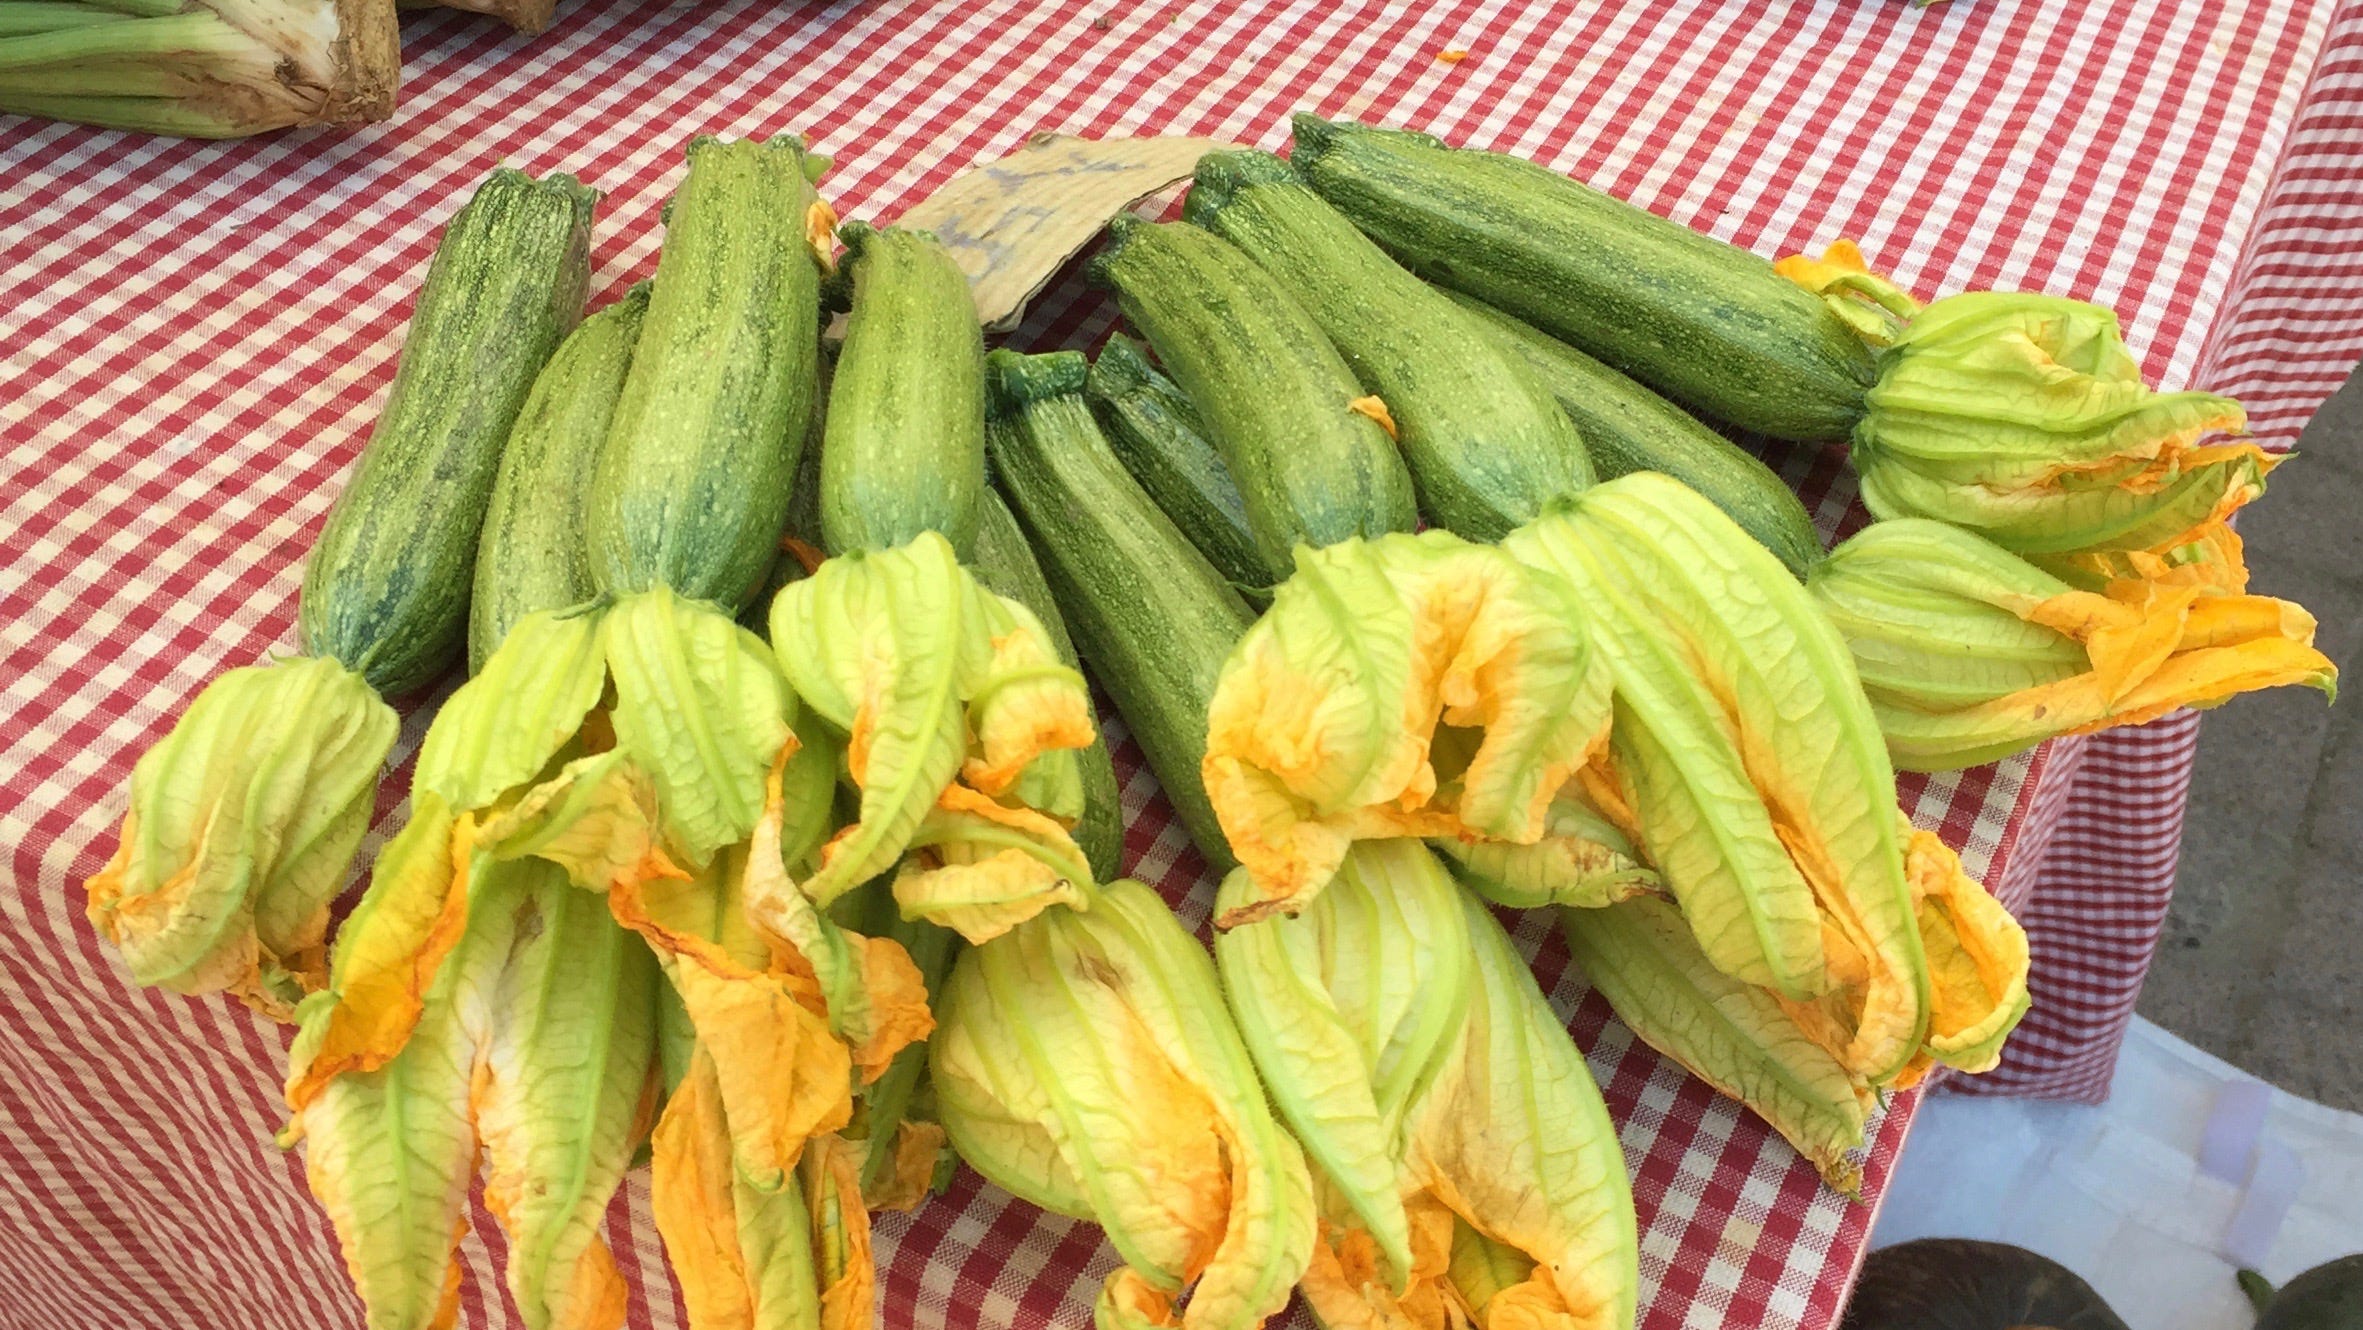 Seven ways to get most from Stark farmers markets